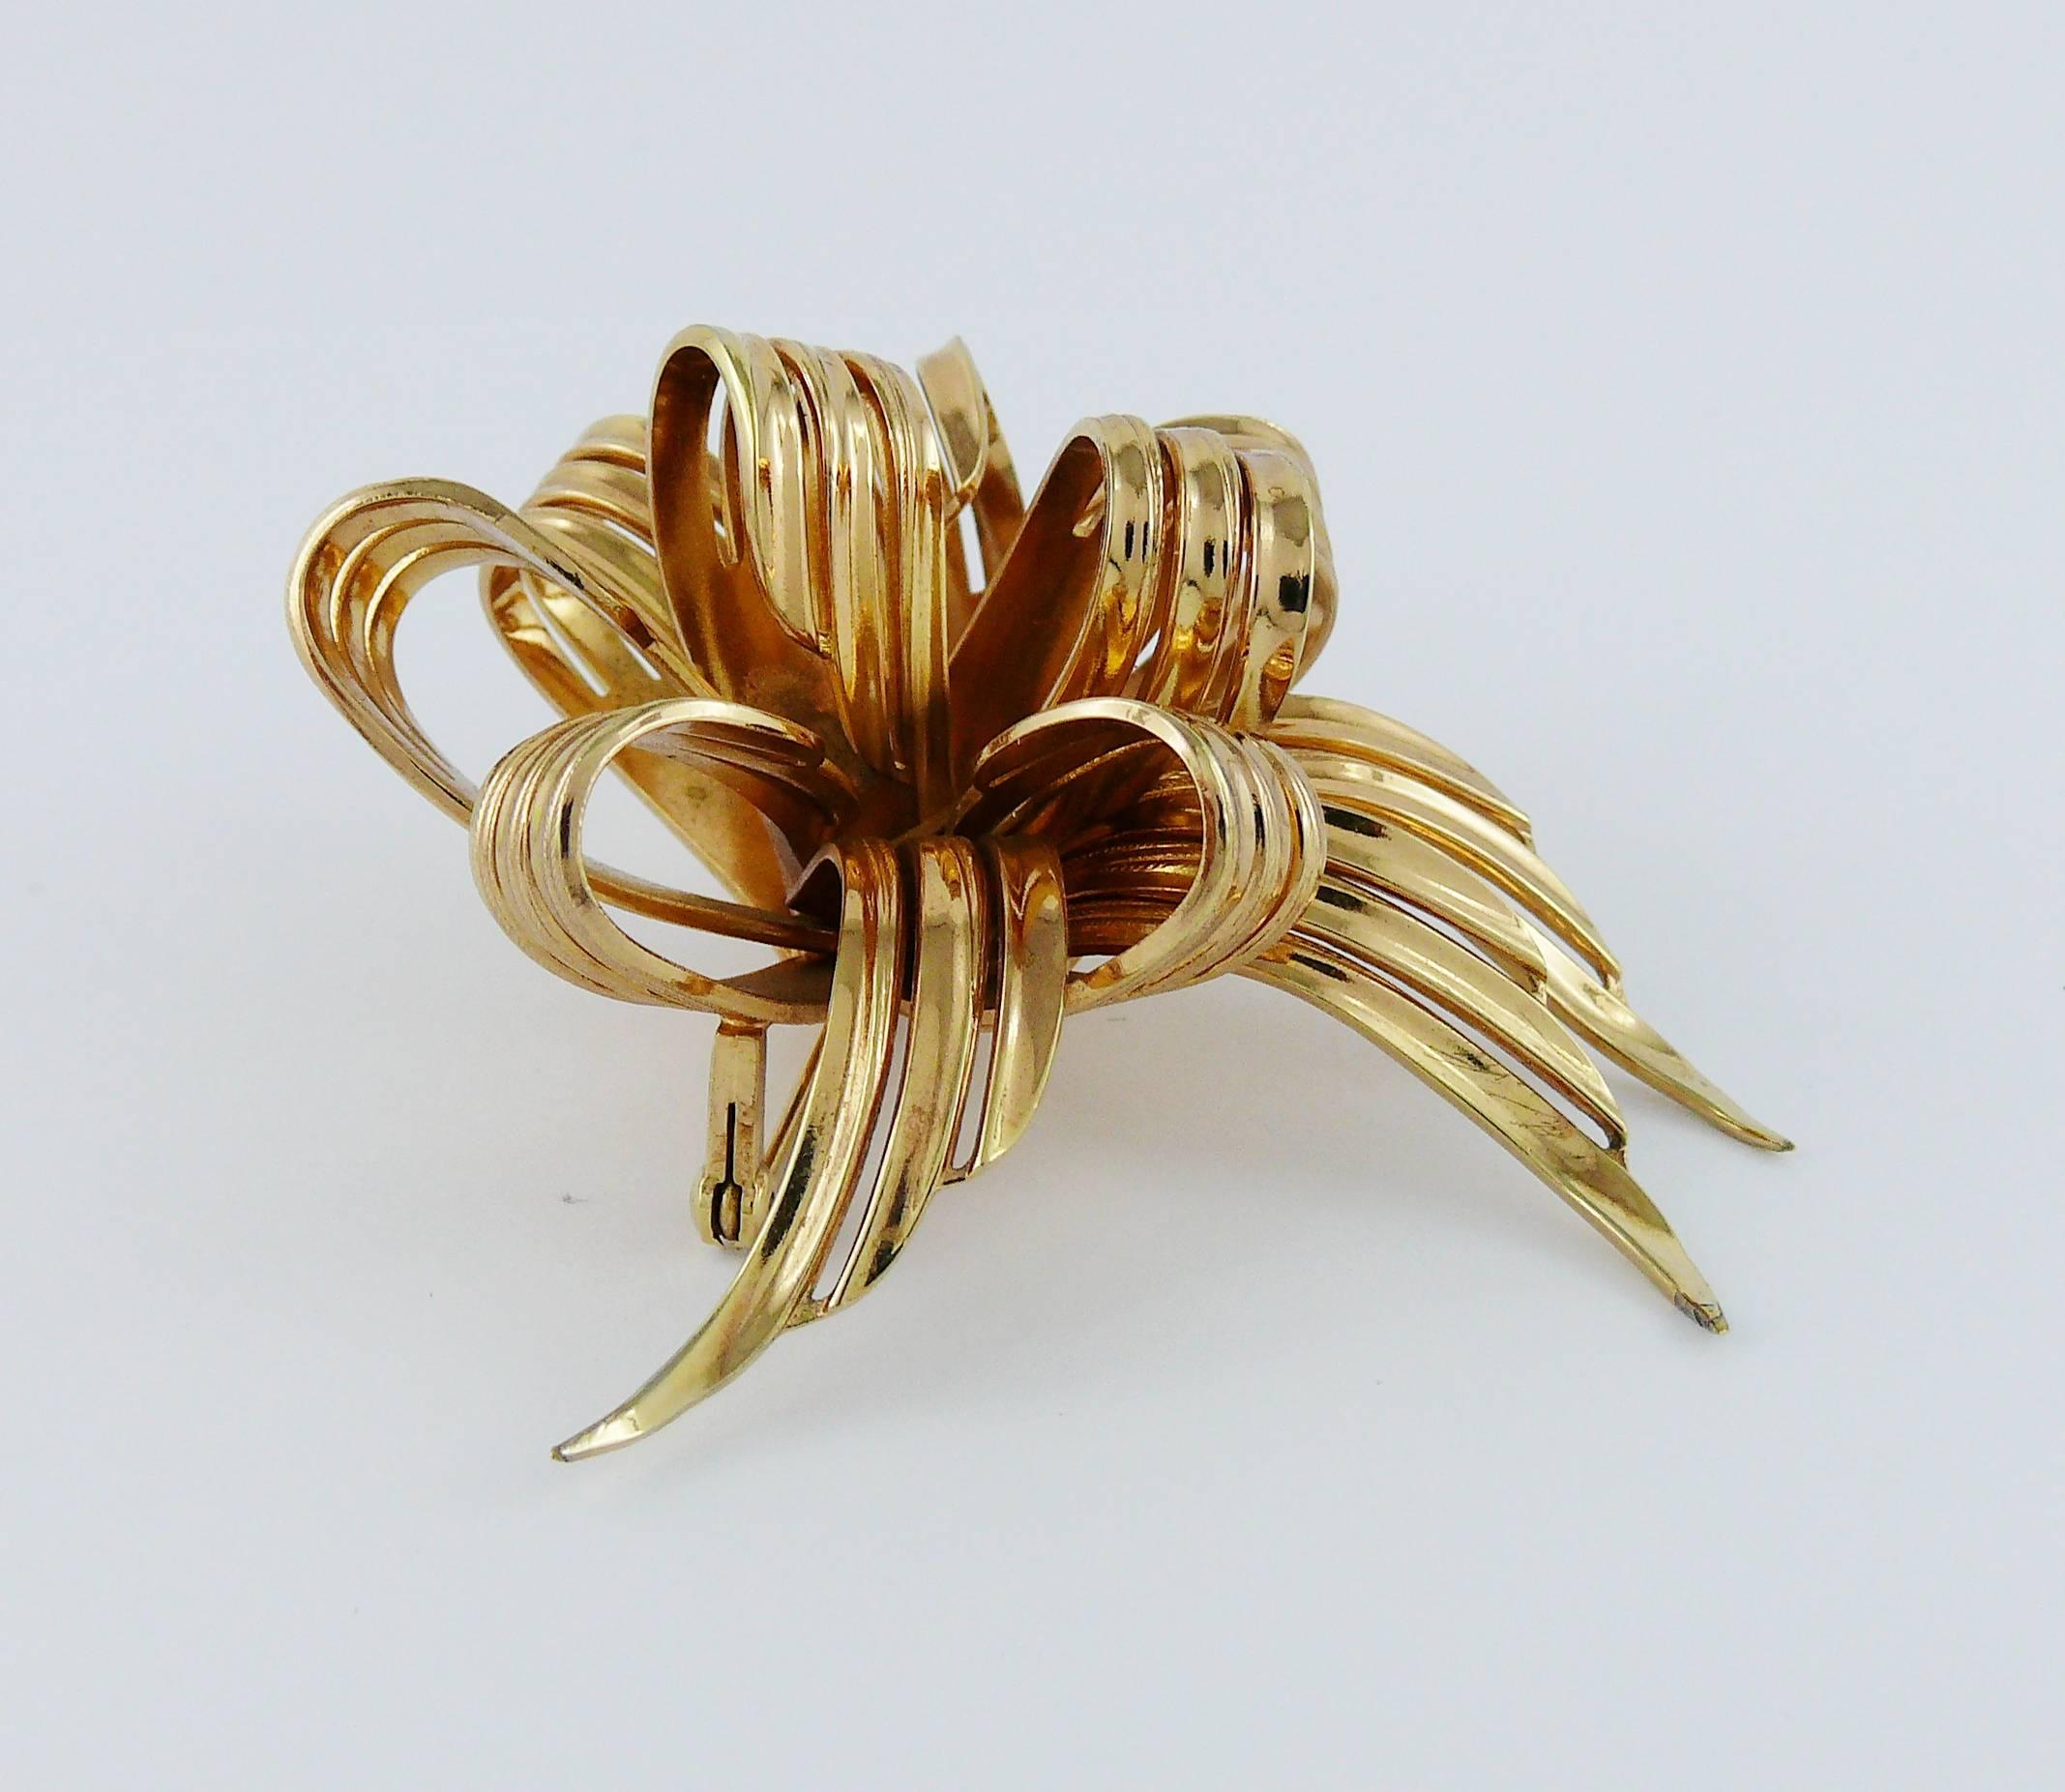 CHRISTIAN DIOR vintage 1966 3-D gold toned ribbon bow brooch.

Embossed CHR. DIOR 1966 Germany.

Indicative measurements : max. length approx. 6.5 cm (2.56 inches) / max. width approx. 6.5 cm (2.56 inches).

JEWELRY CONDITION CHART 
- New or